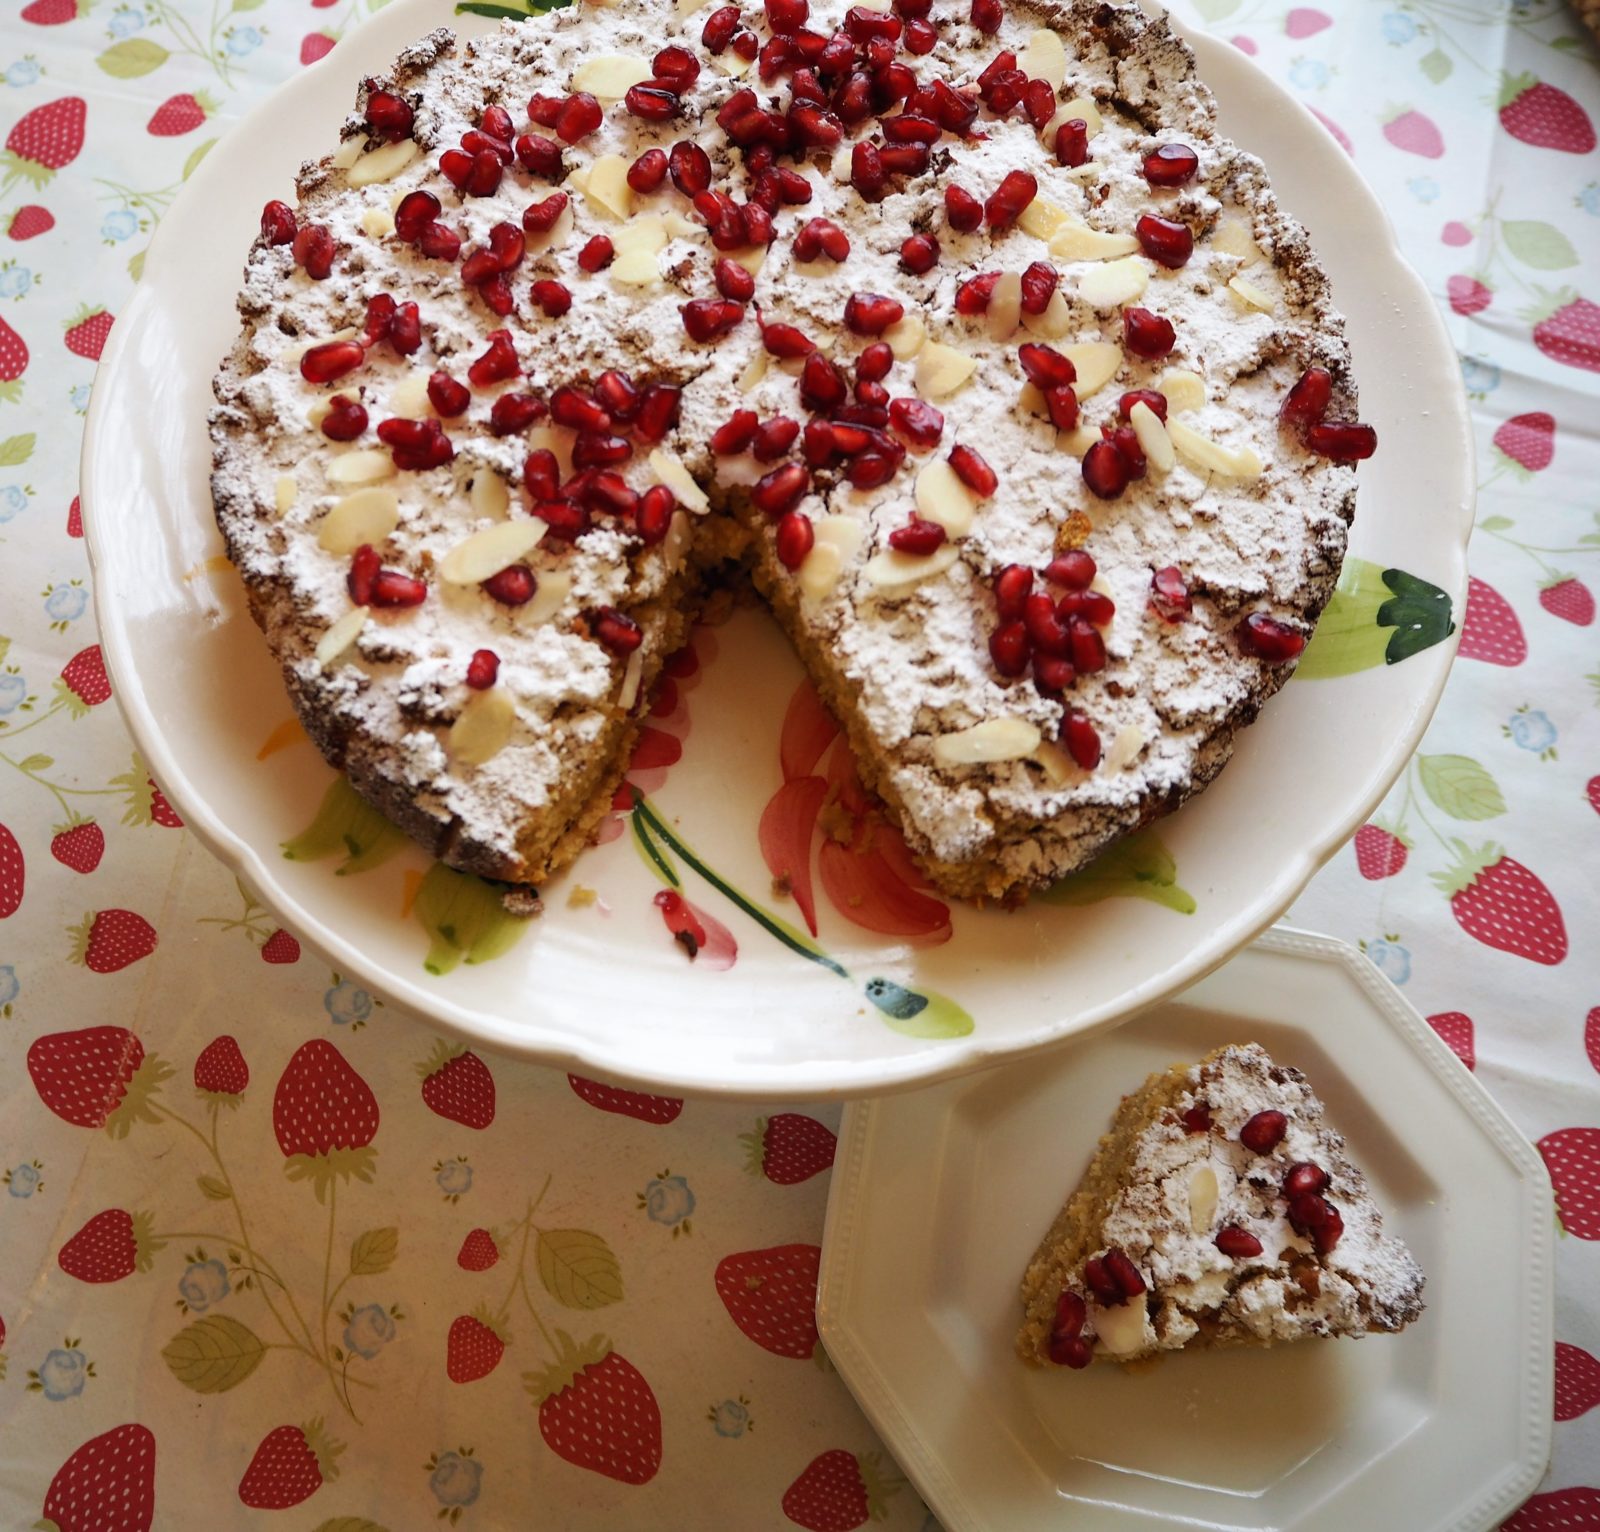 Clementine and Pomegranate Cake